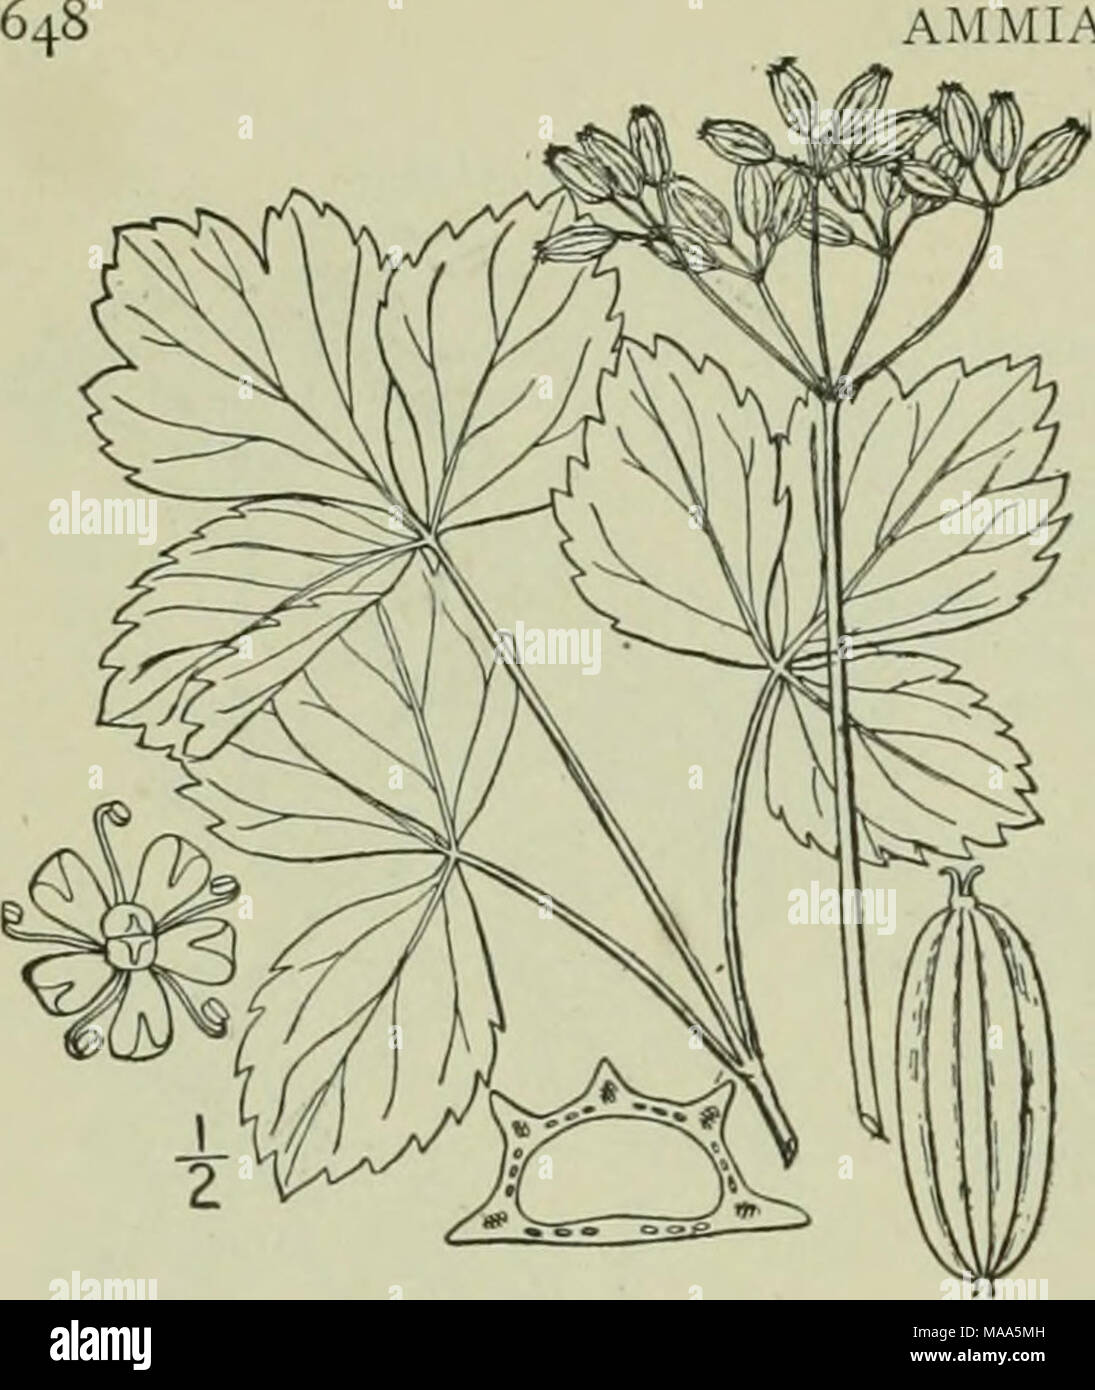 . An illustrated flora of the northern United States, Canada and the British possessions : from Newfoundland to the parallel of the southern boundary of Virginia and from the Atlantic Ocean westward to the 102nd meridian . AMMIACEAE. Vol. IT. 2. Ligusticum scoticum L. Scotch or Sea Lovage. Sea Parsley. Fig. 3152. Ligusticum scoticum L. Sp. PI. 250. 1753. Stem simple, or rarely slightly branched, lo'-3° high. Leaves mostly biternate, the segments thick and fleshy, broadly obovate- ovate or oval, 1-4' long, shining, obtuse or acute at the apex, narrowed or the terminal one rounded at the base, d Stock Photo